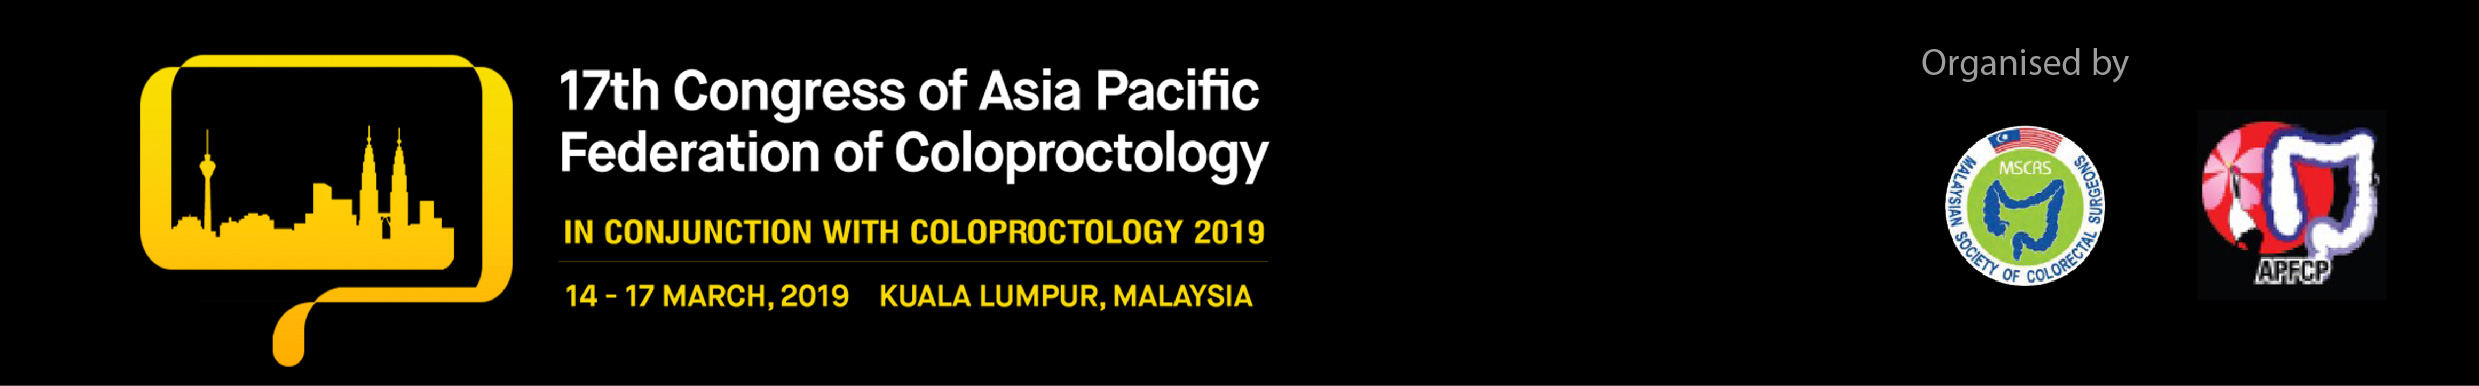 17th Congress of Asia Pacific Federation of Coloproctology (APFCP 2019)